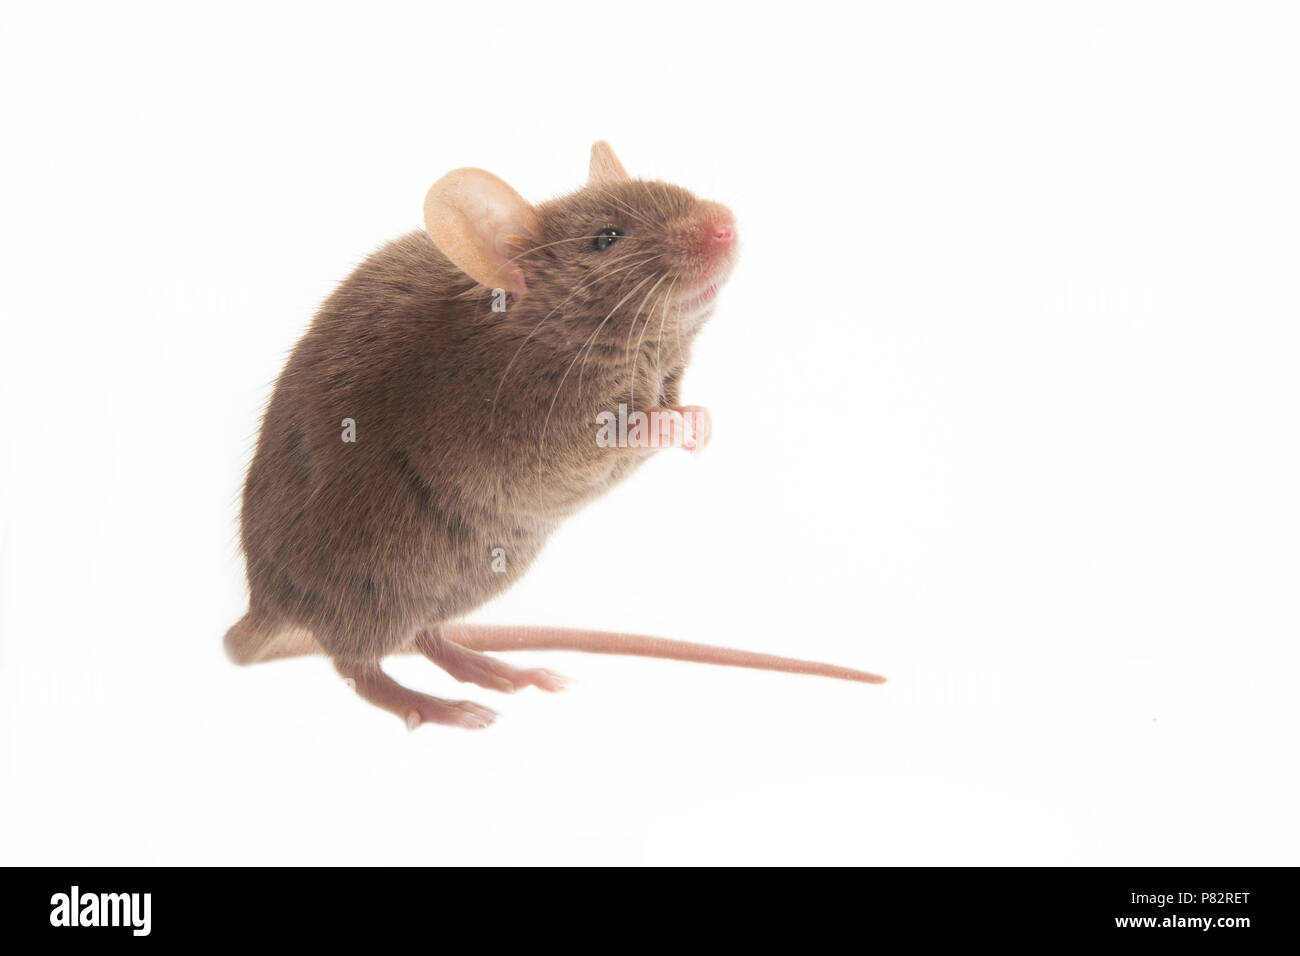 Huismuis, House Mouse, Mus musculus Stock Photo